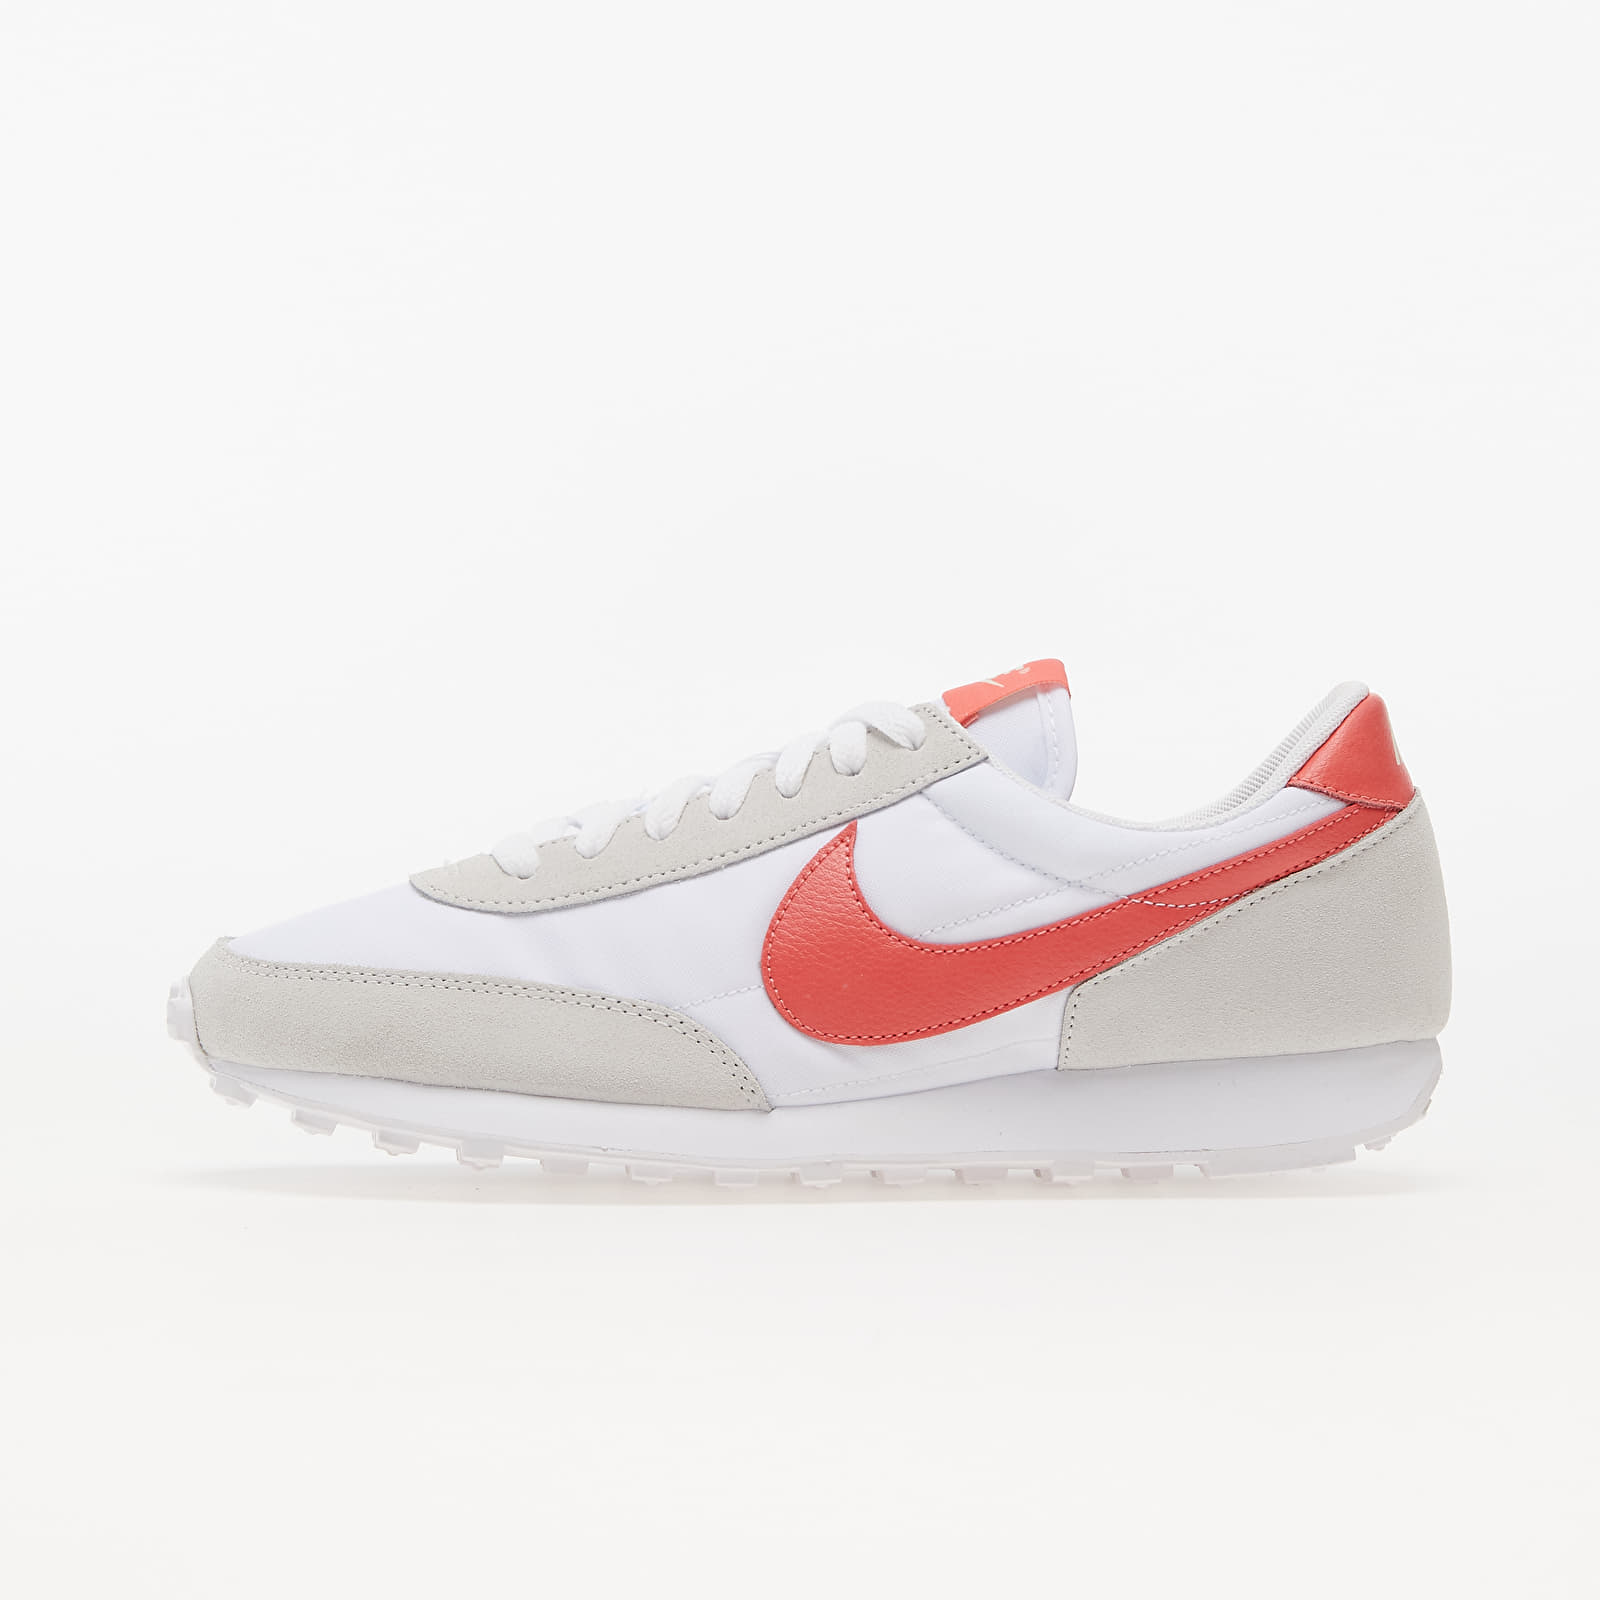 Chaussures et baskets femme Nike W Daybreak White/ Magic Ember-Lime Ice-Summit White